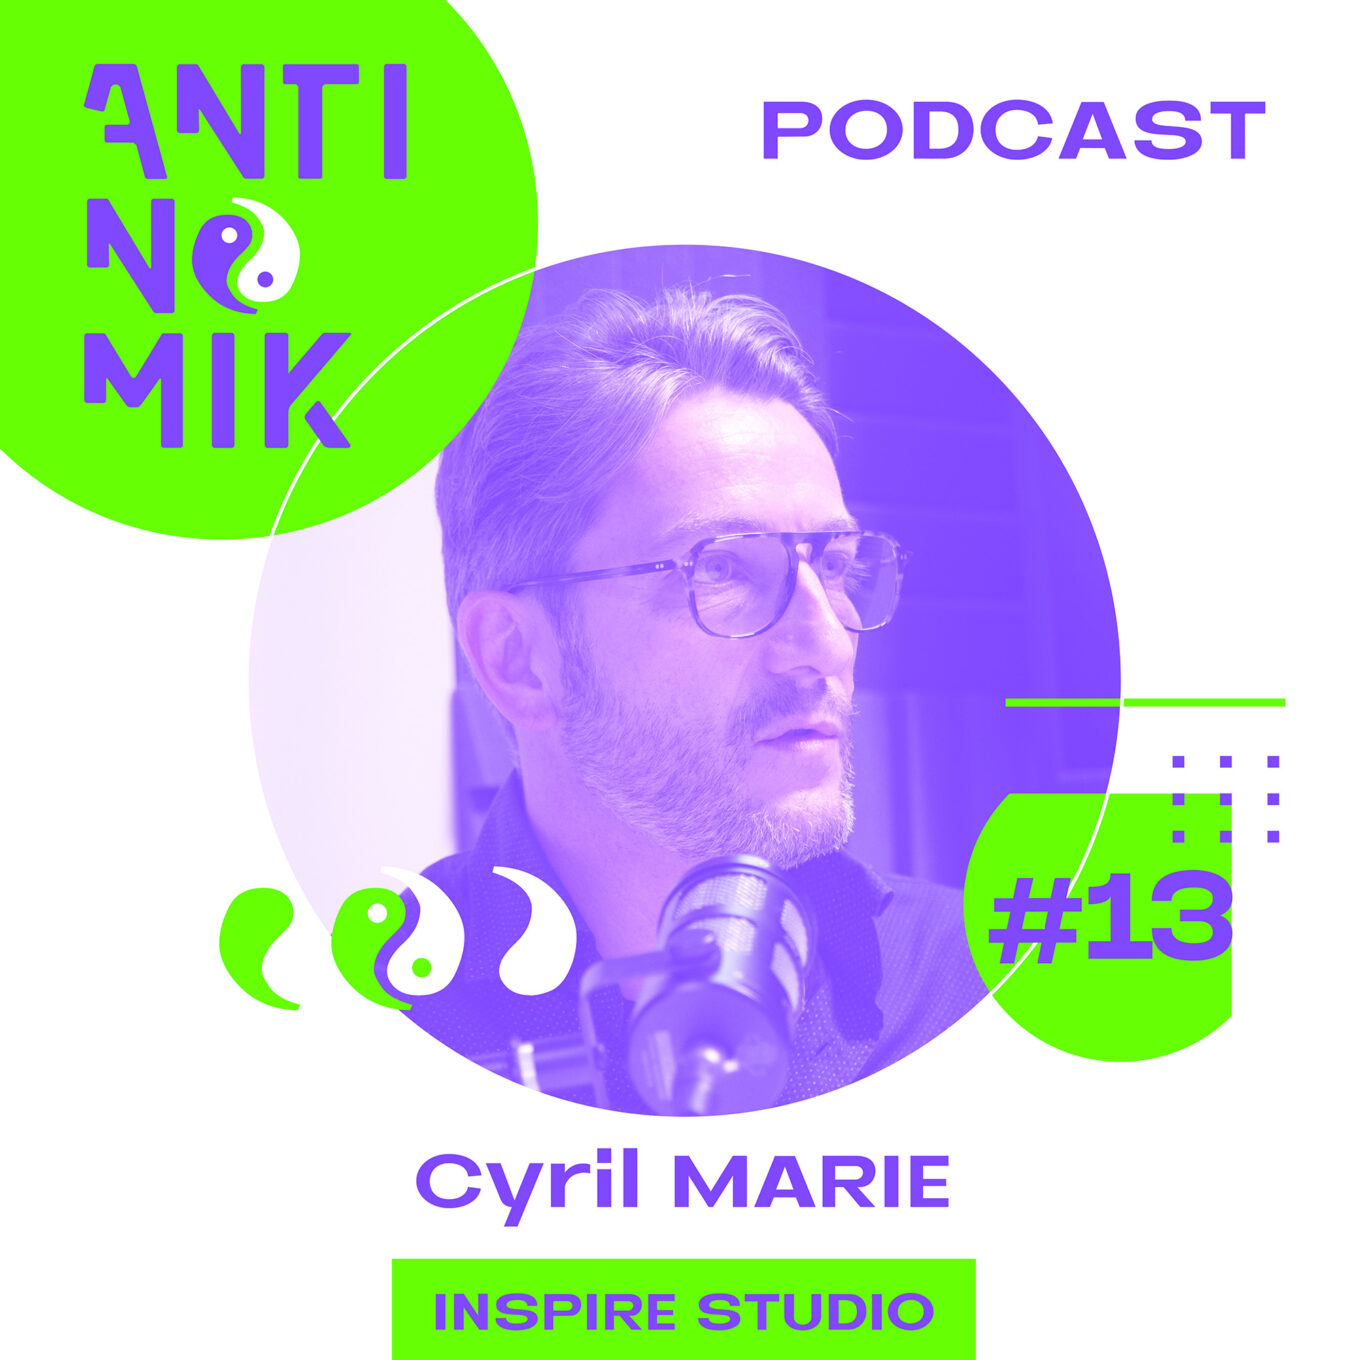 Cyril MARIE – INSPIRE STUDIO - Mobile